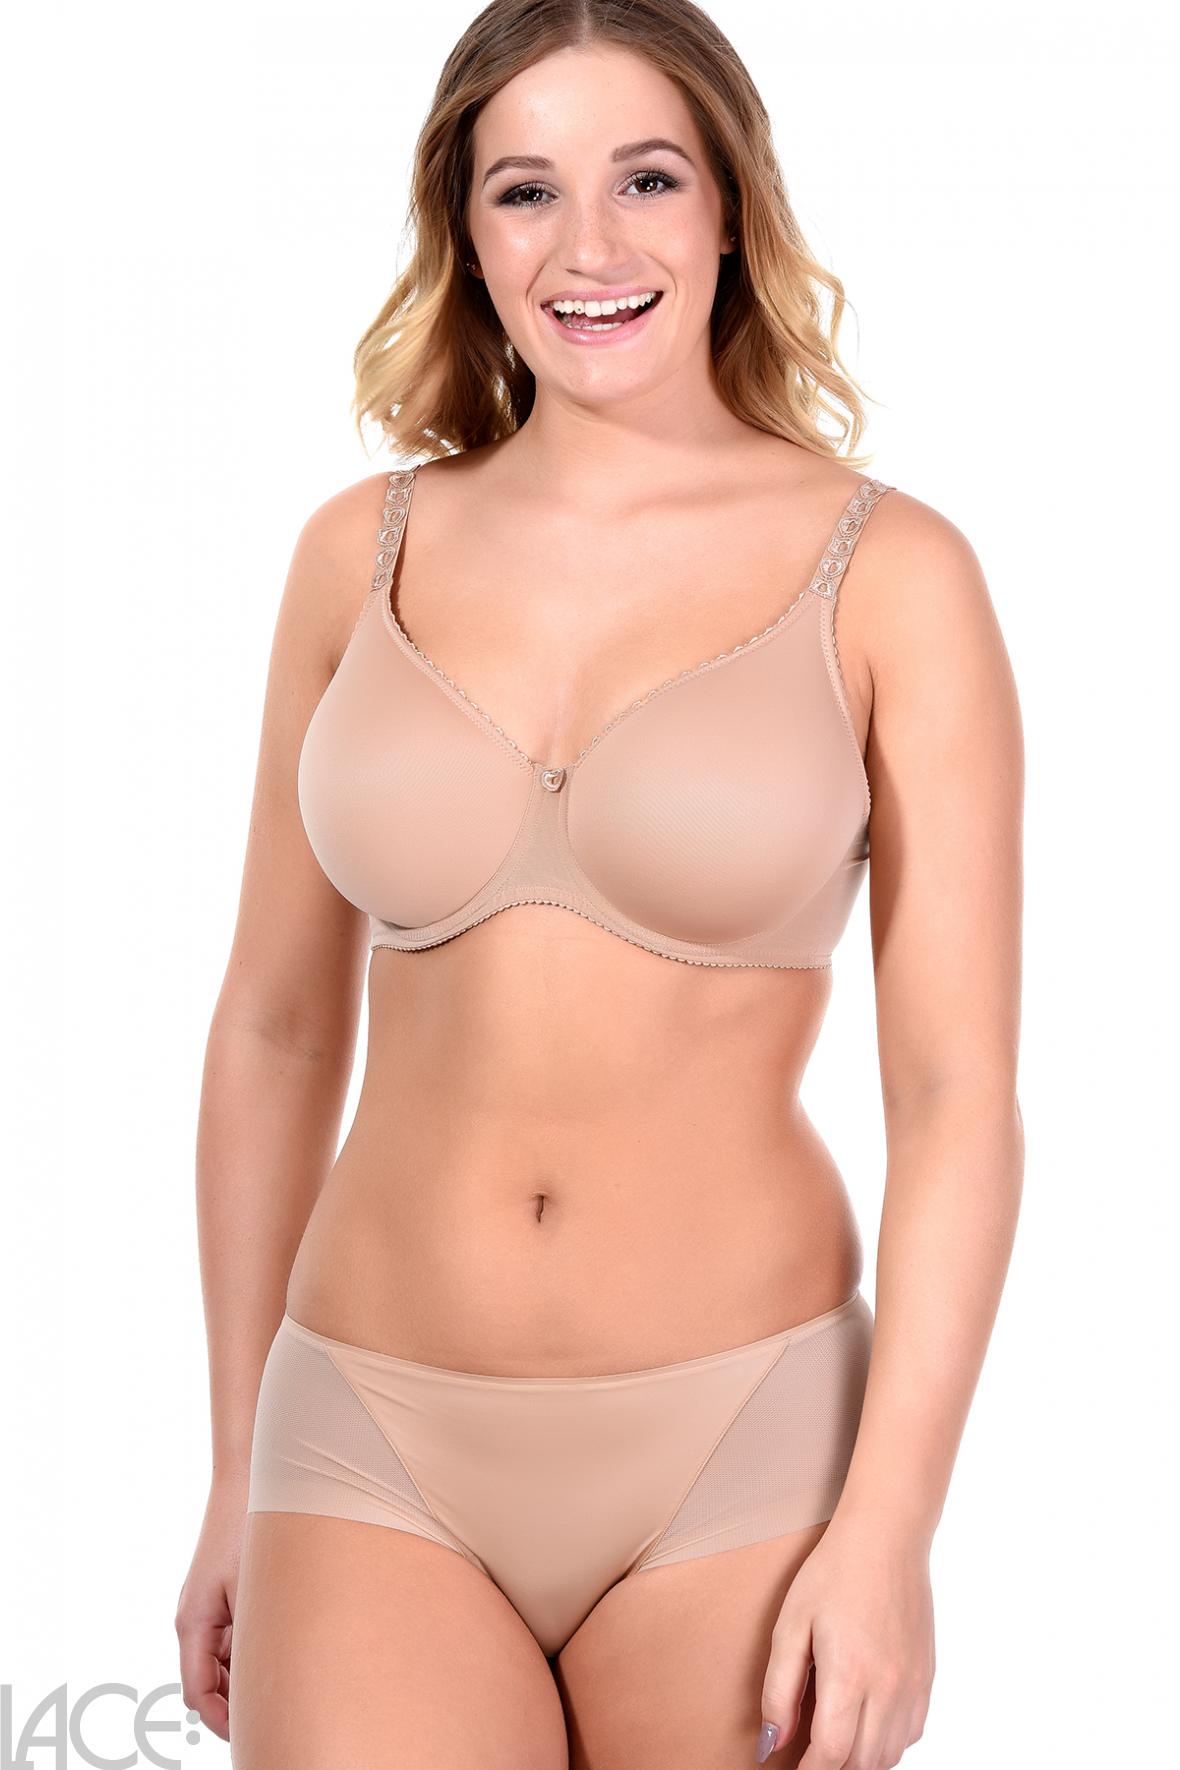 PrimaDonna Lingerie Every Woman T-shirt Spacer bra D-G cup –